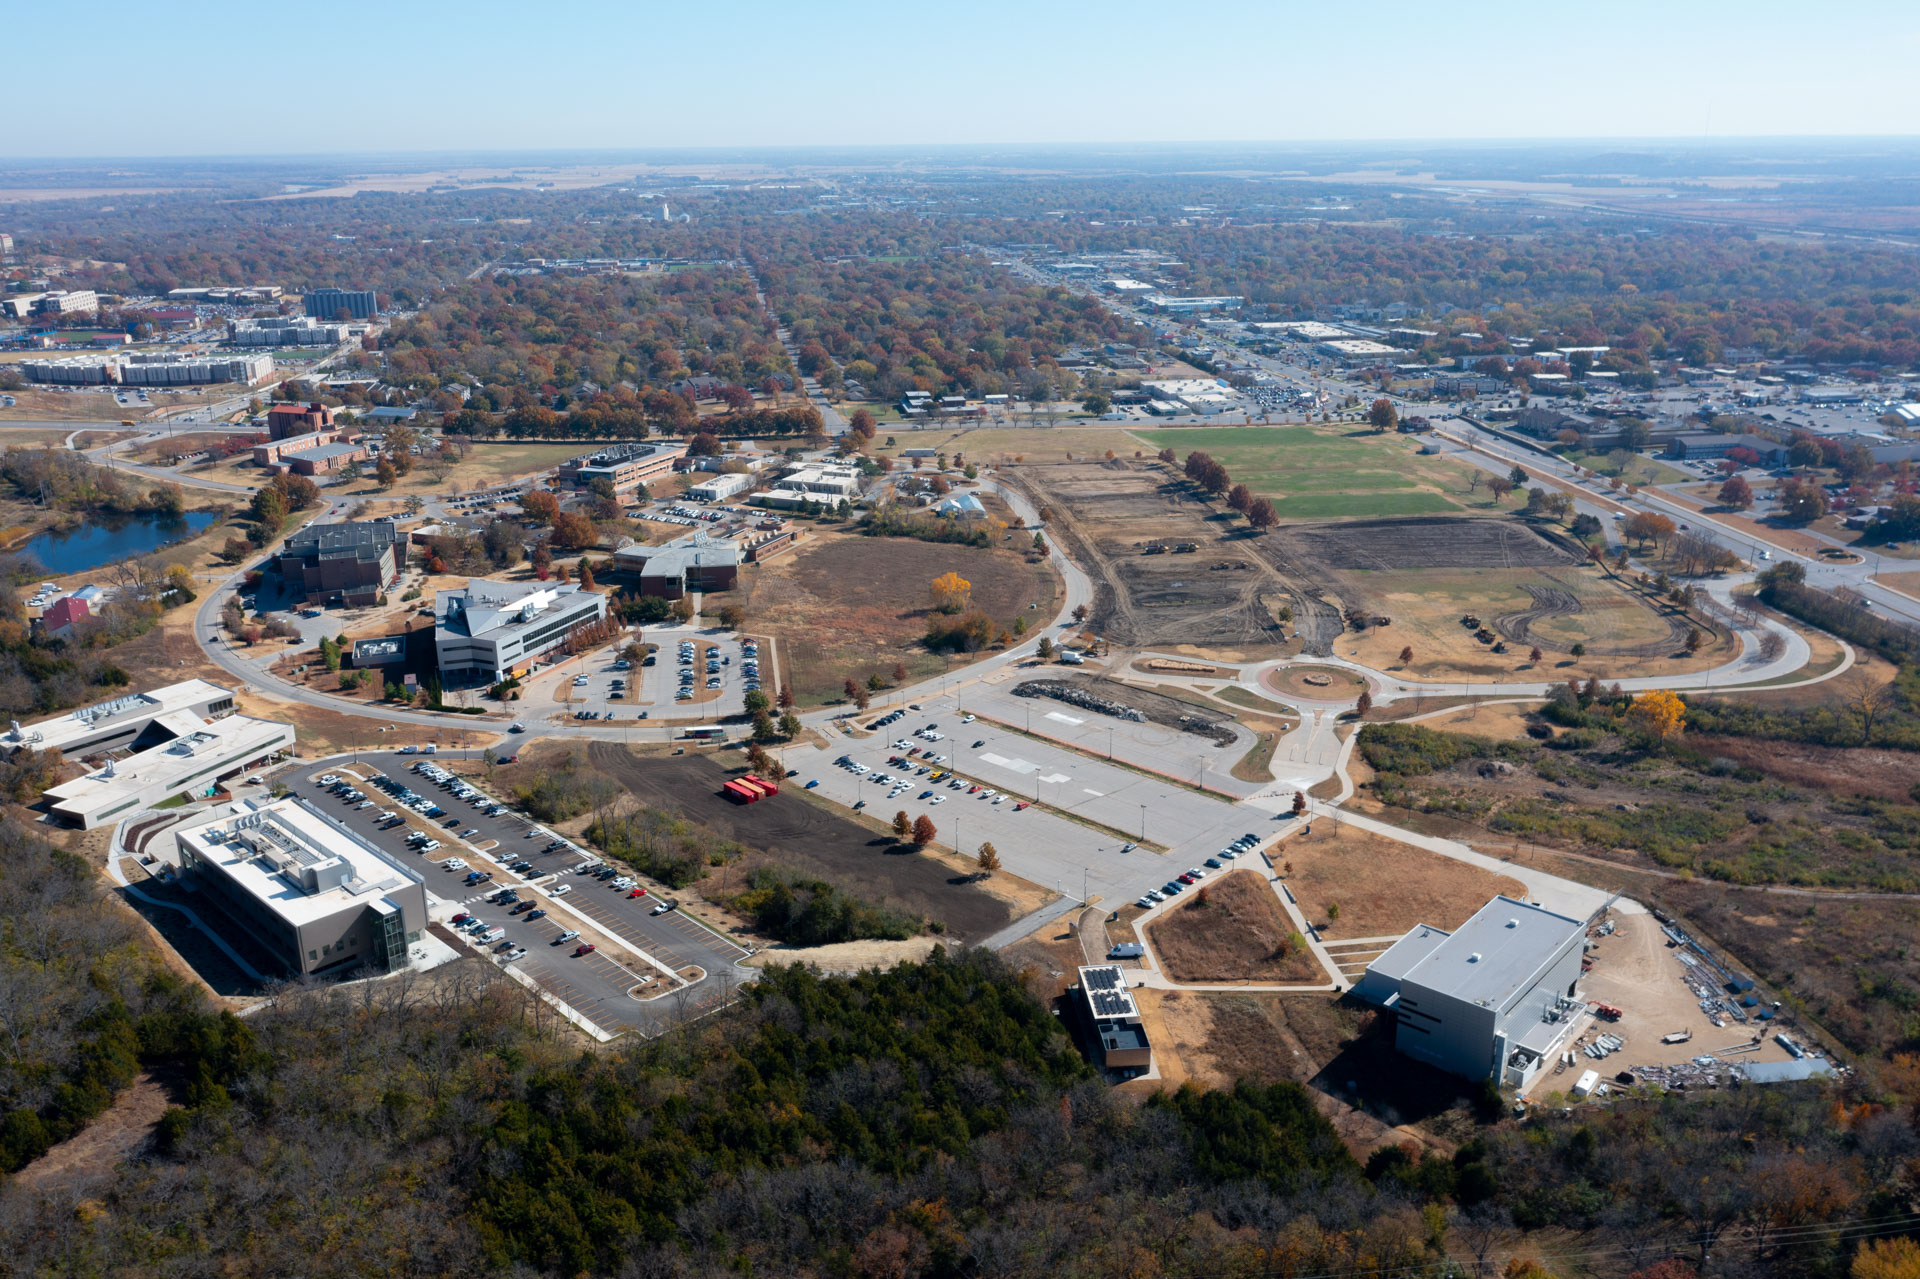 Drone shot of the Bioscience and Technology Business Incubator in Lawrence, KS and surrounding buildings.